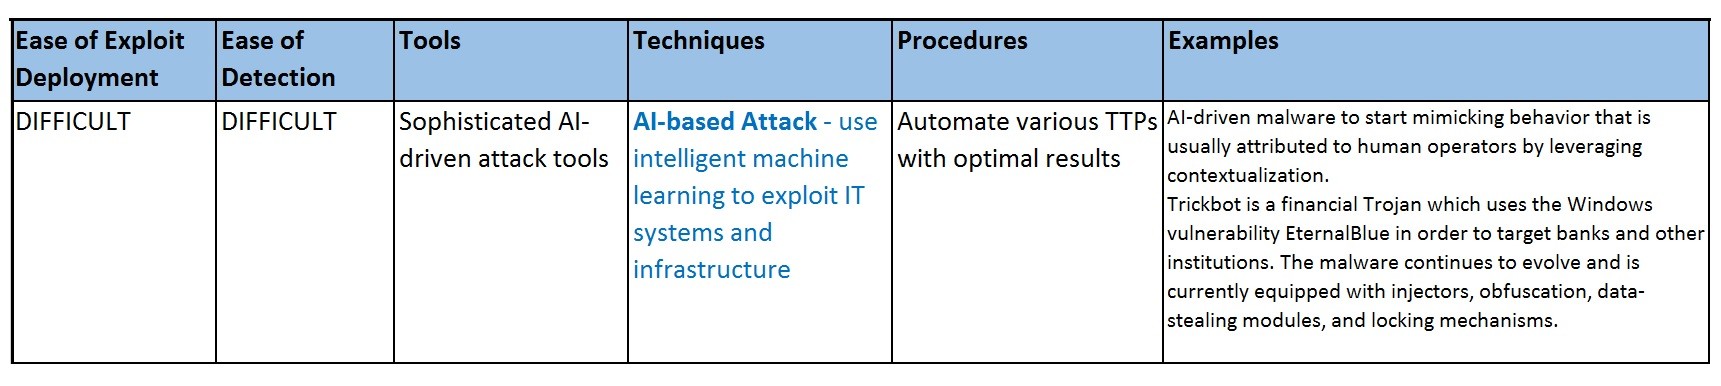 AI-based Attack - Use intelligent machine learning to exploit IT systems